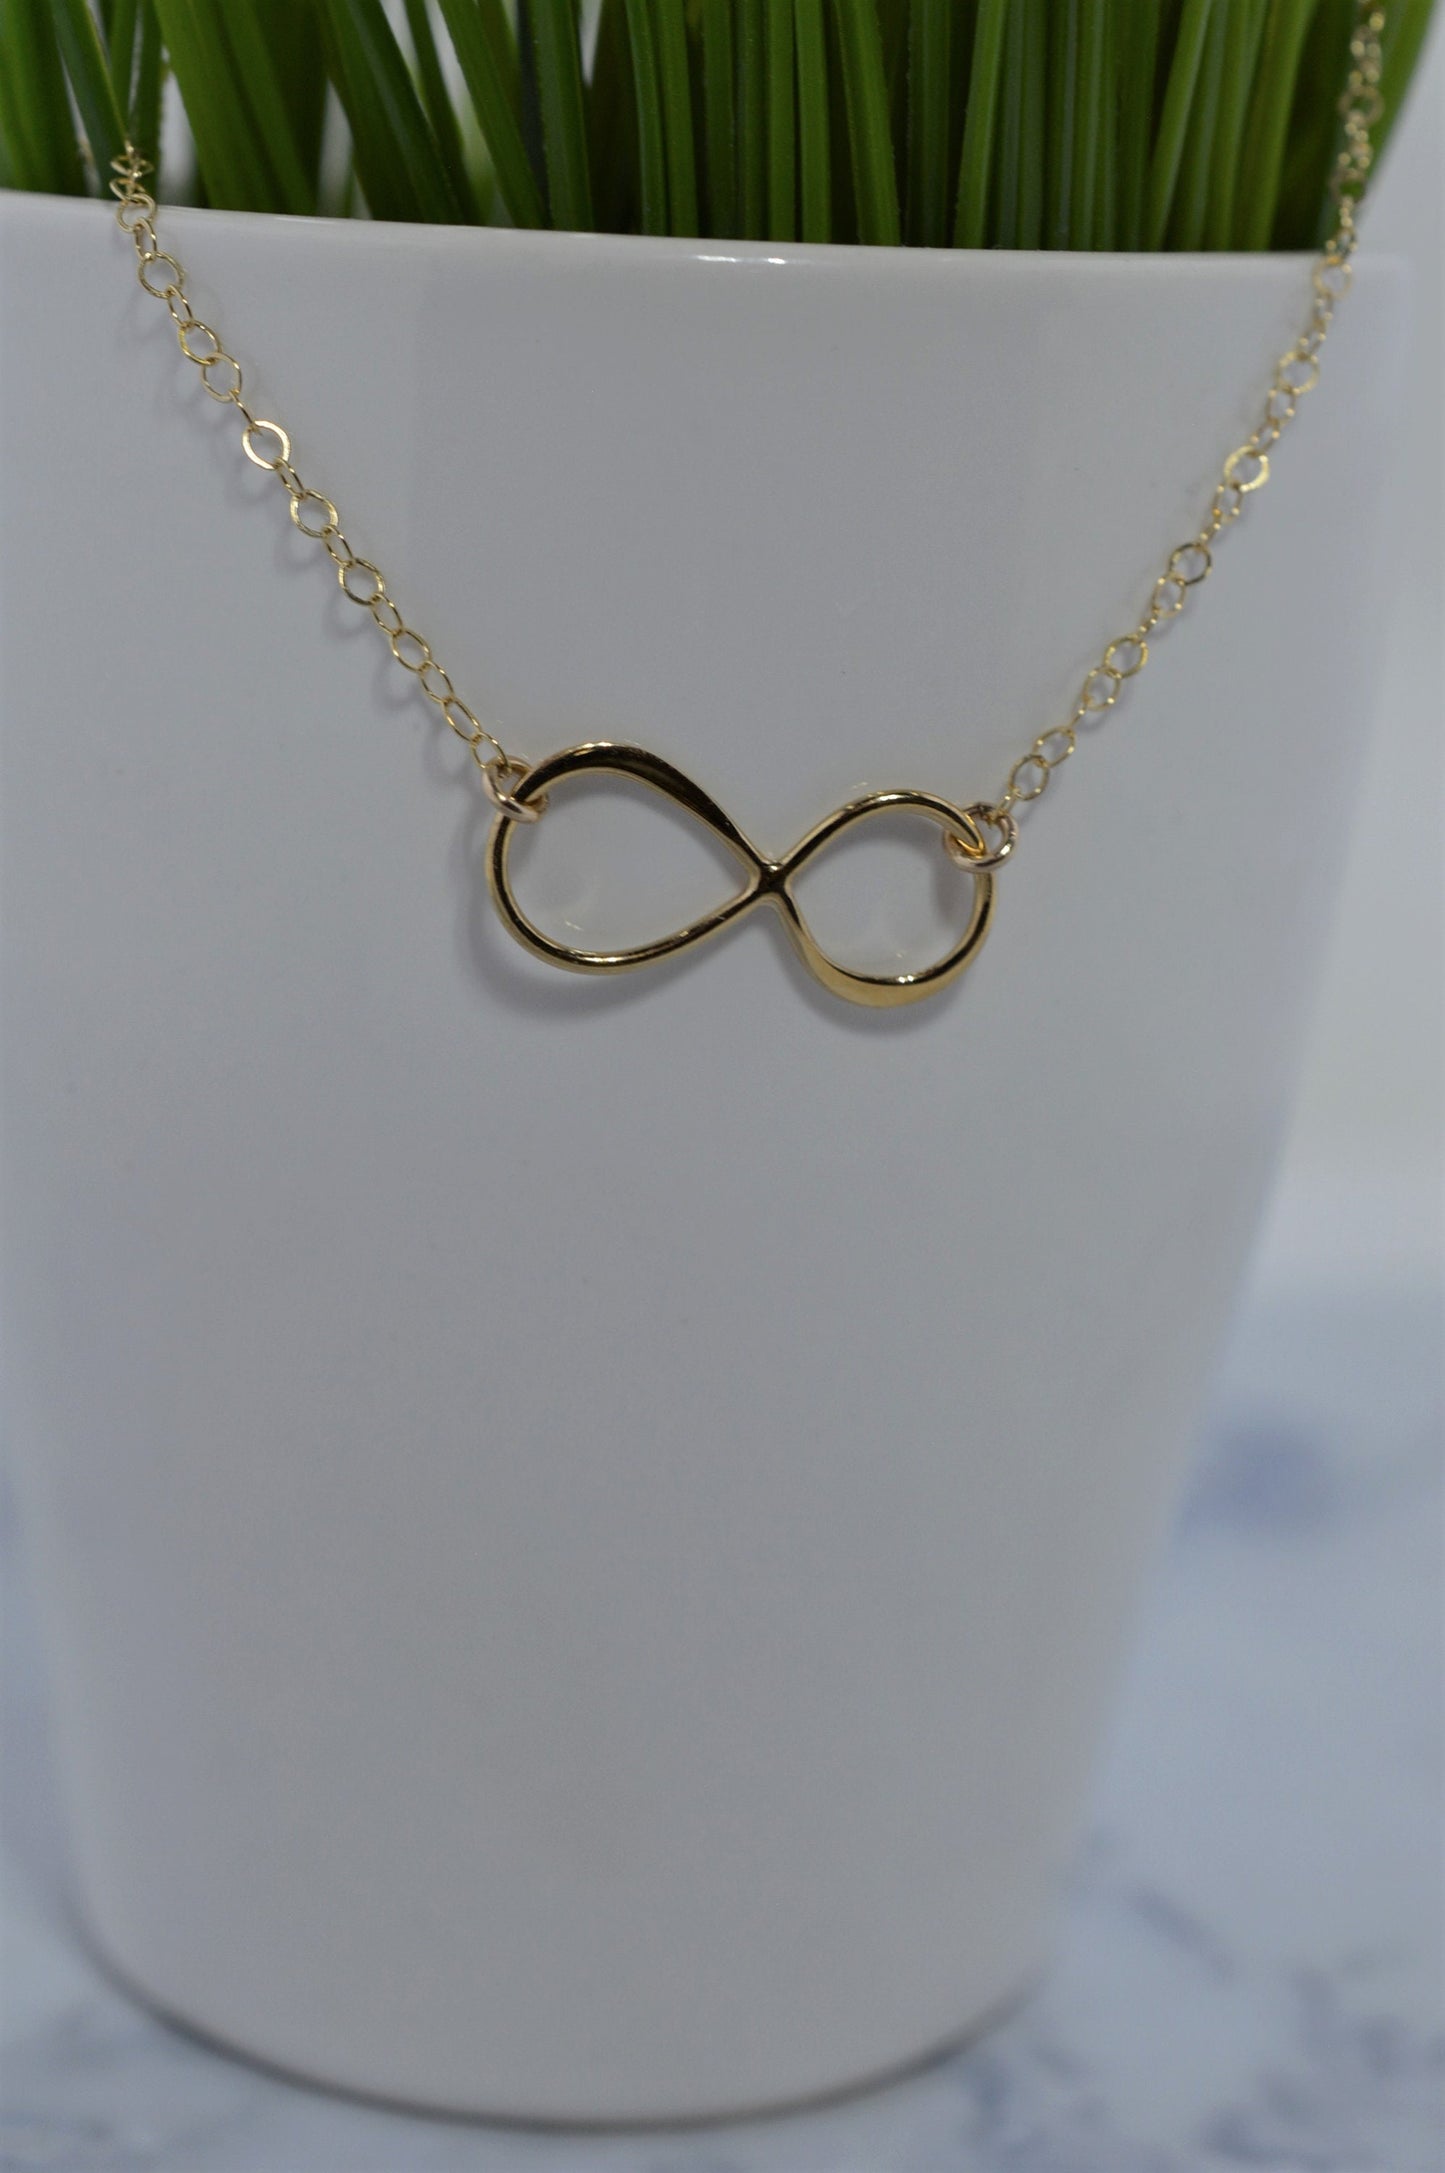 Gold Fill Infinity Necklace